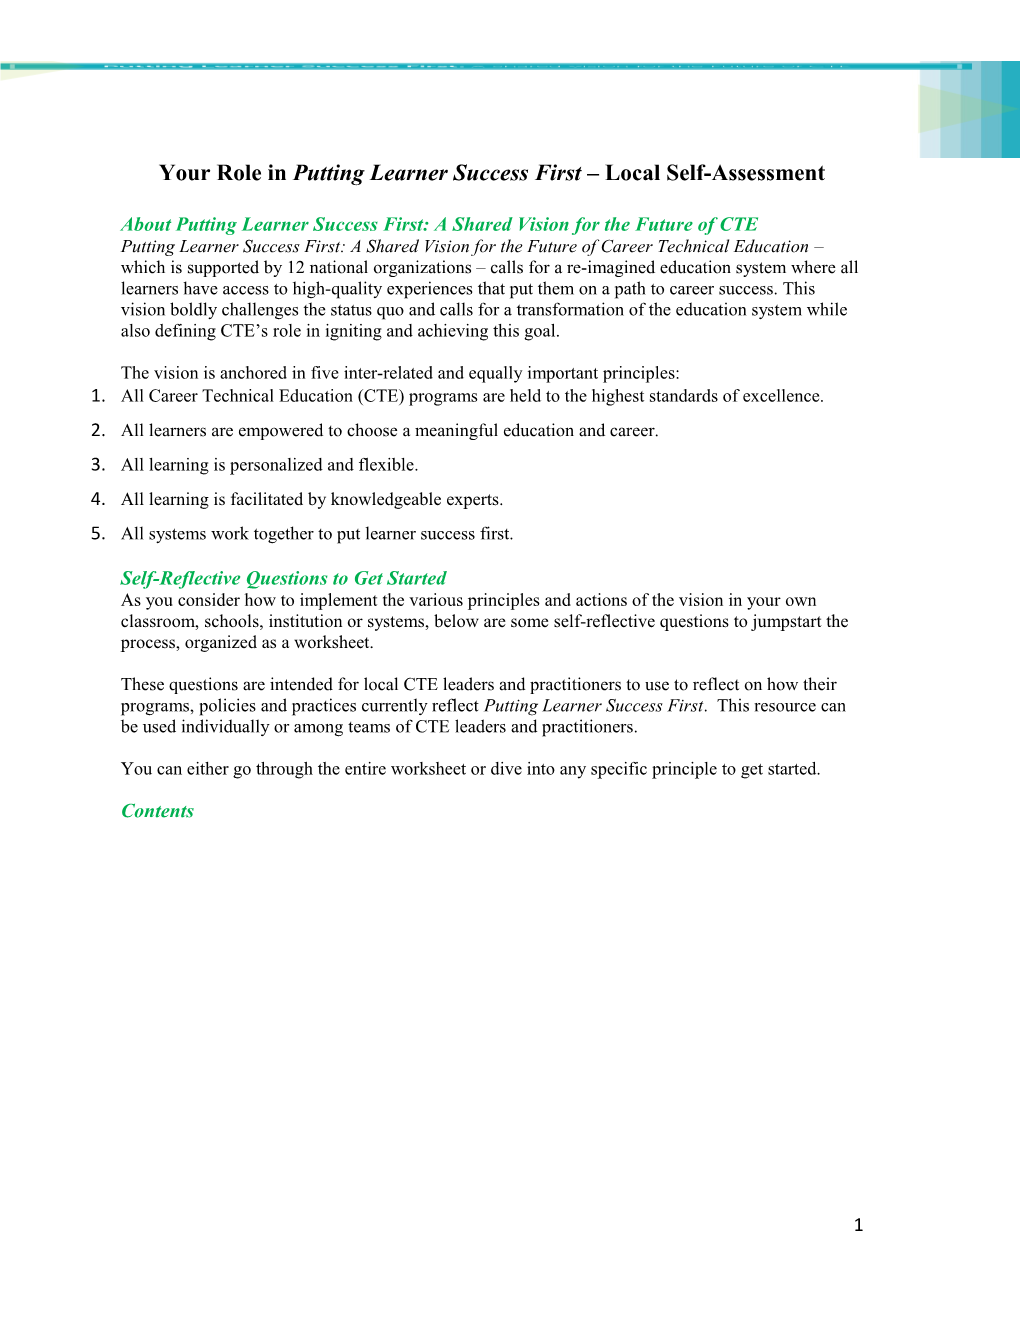 Your Role in Putting Learner Success First Local Self-Assessment